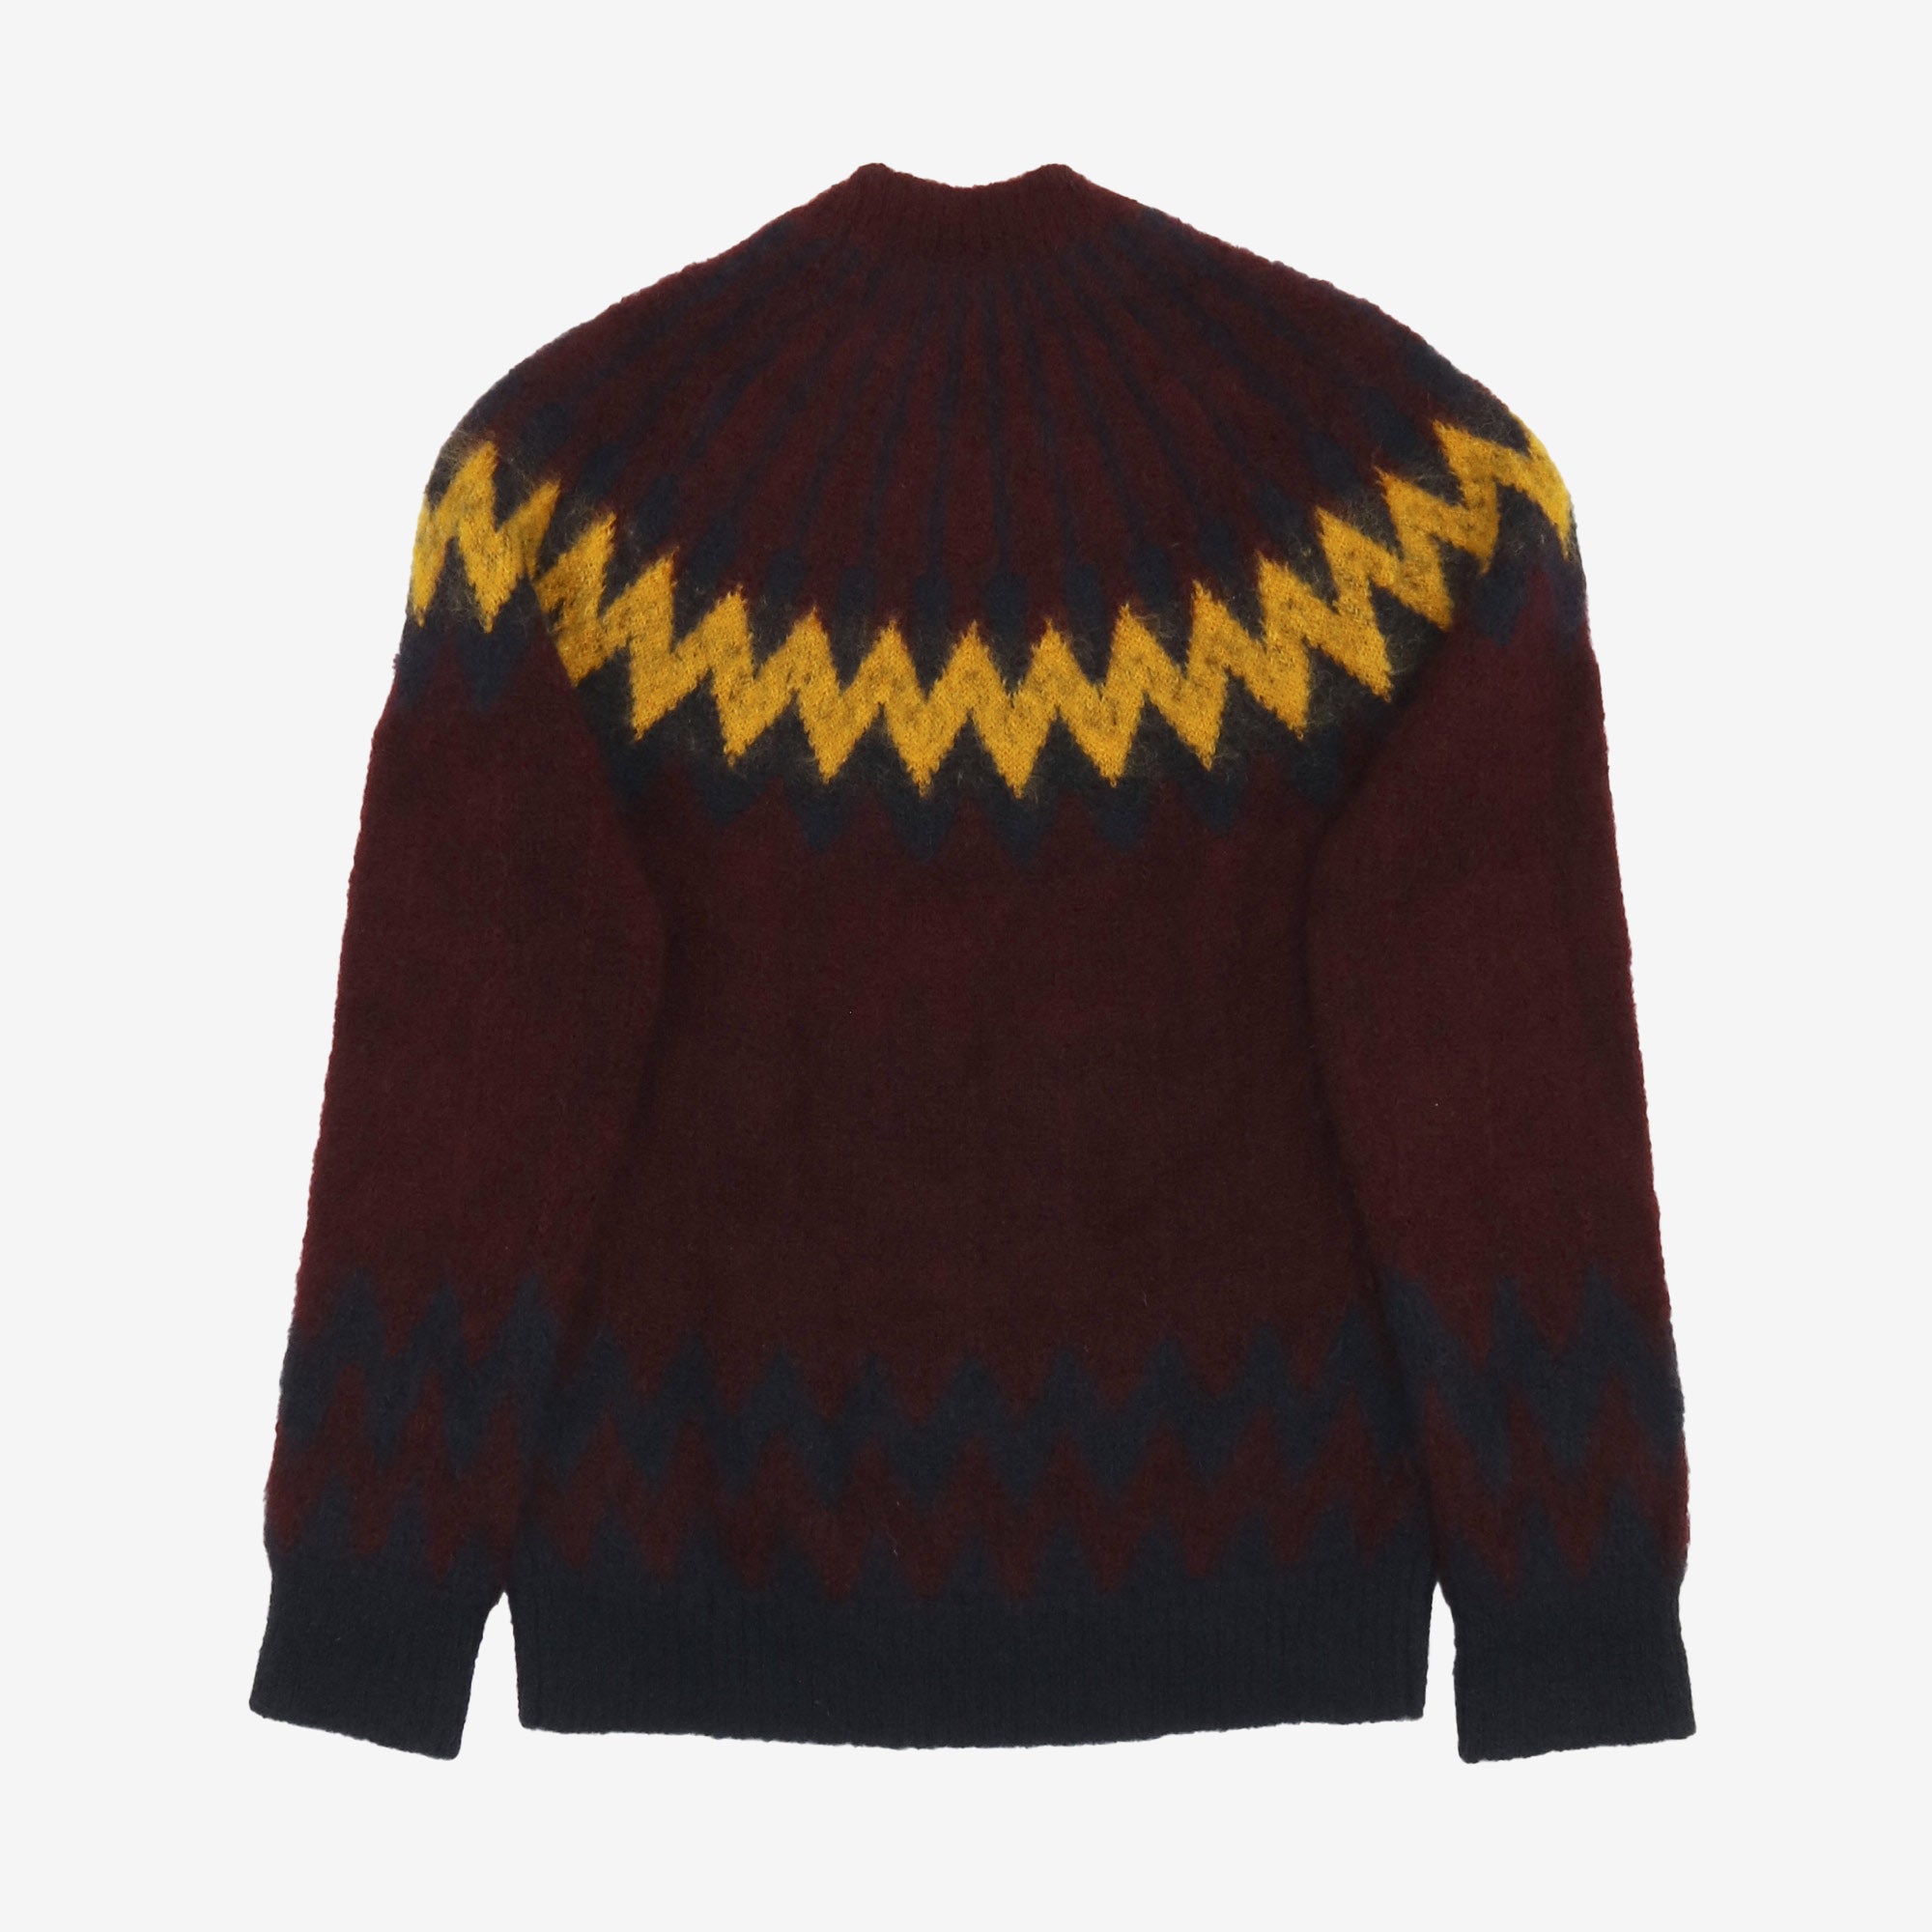 H&M Mohair Sweater